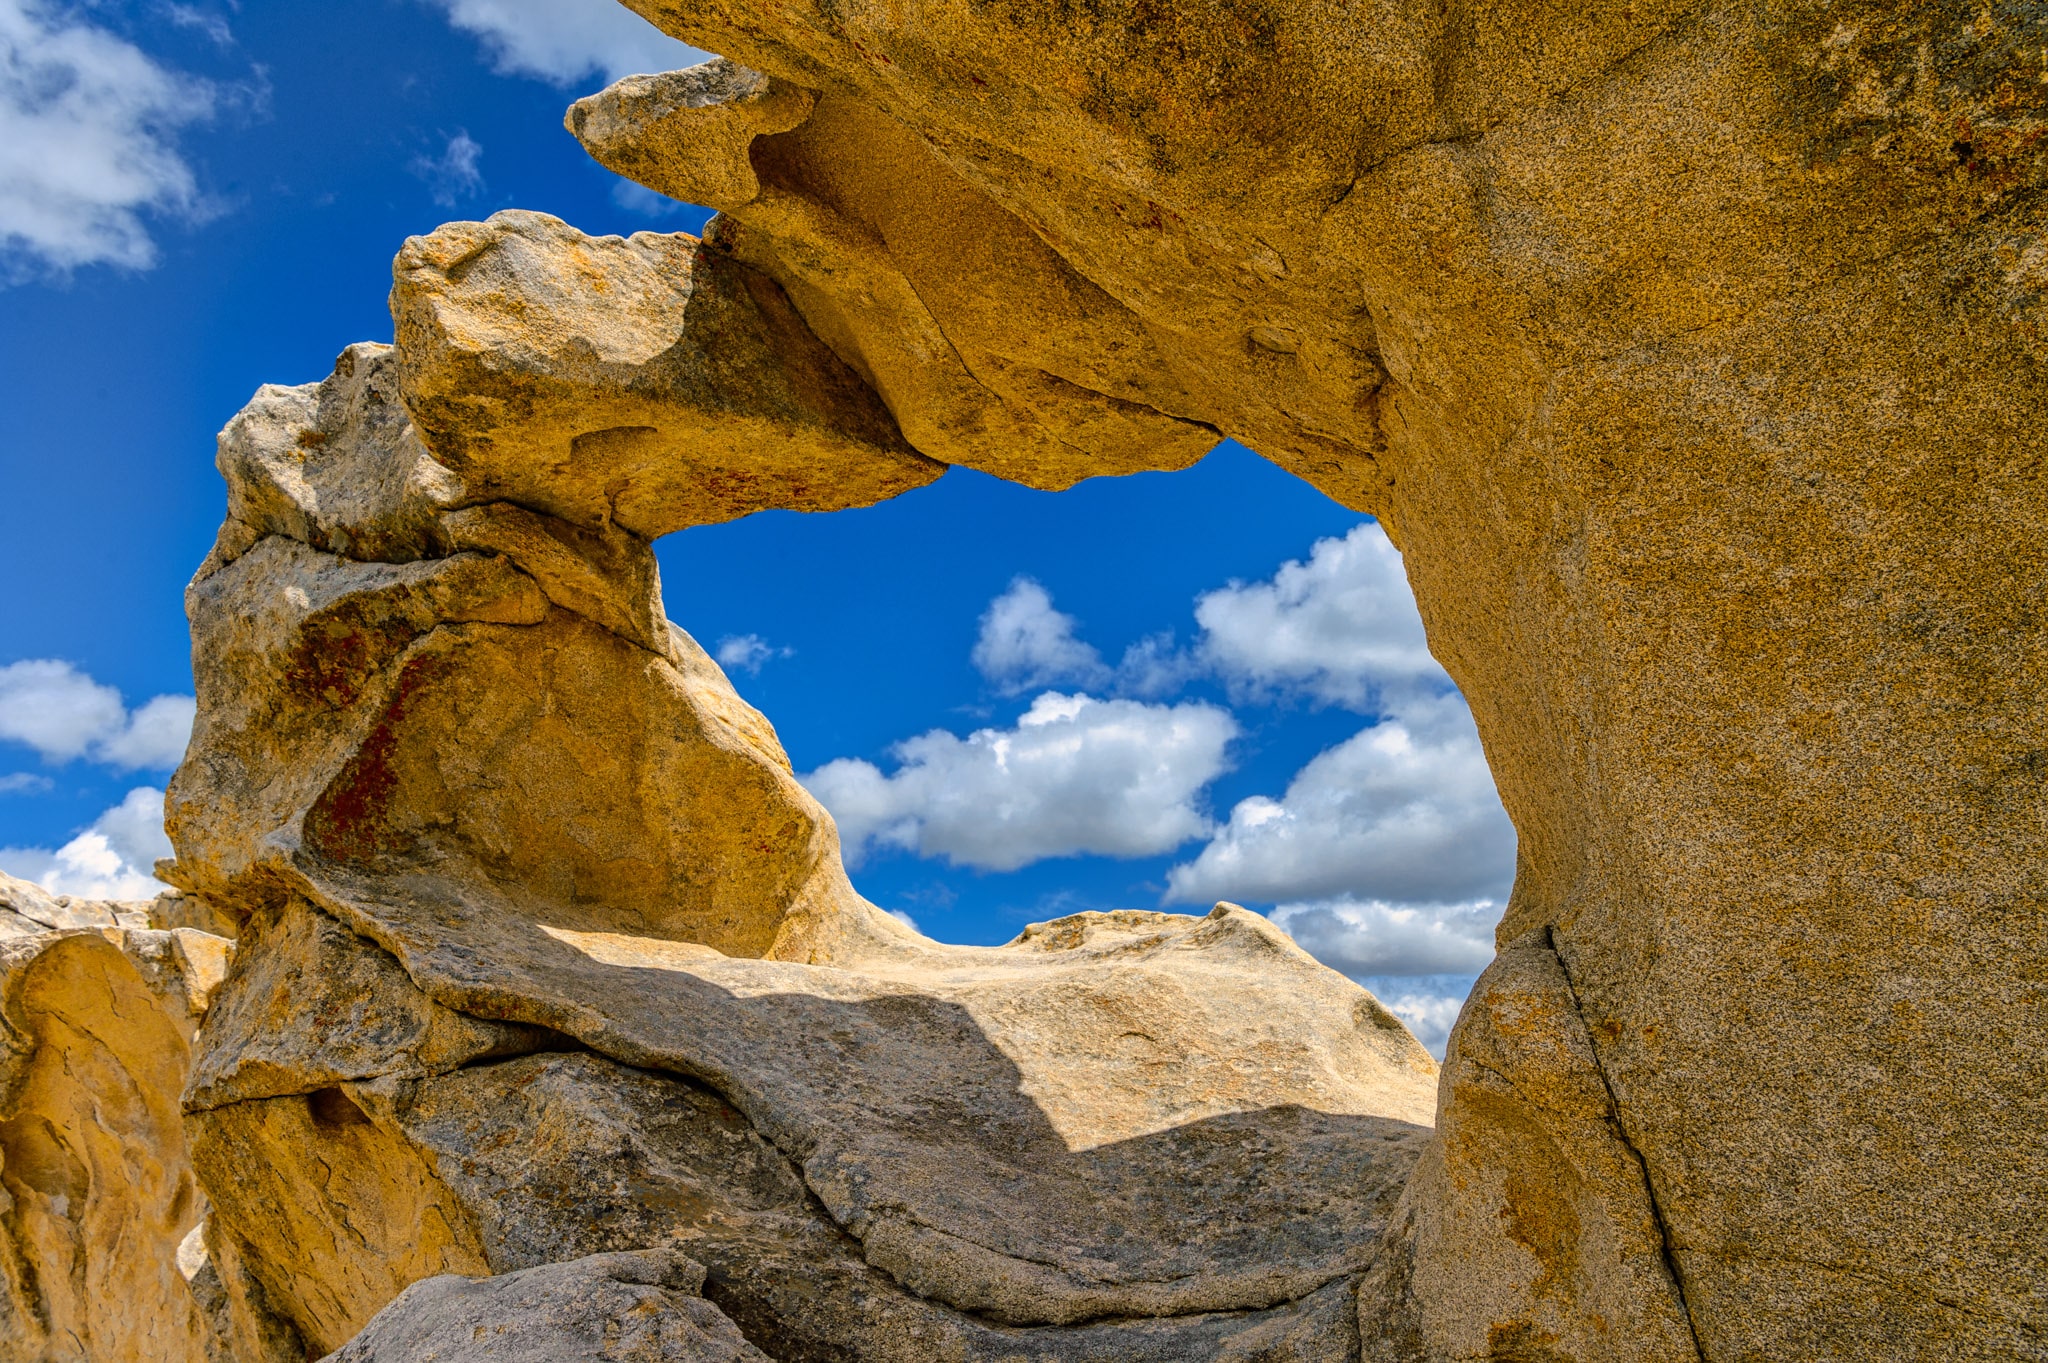 Window Arch as seen from the west side in City of Rocks National Reserve in Idaho.